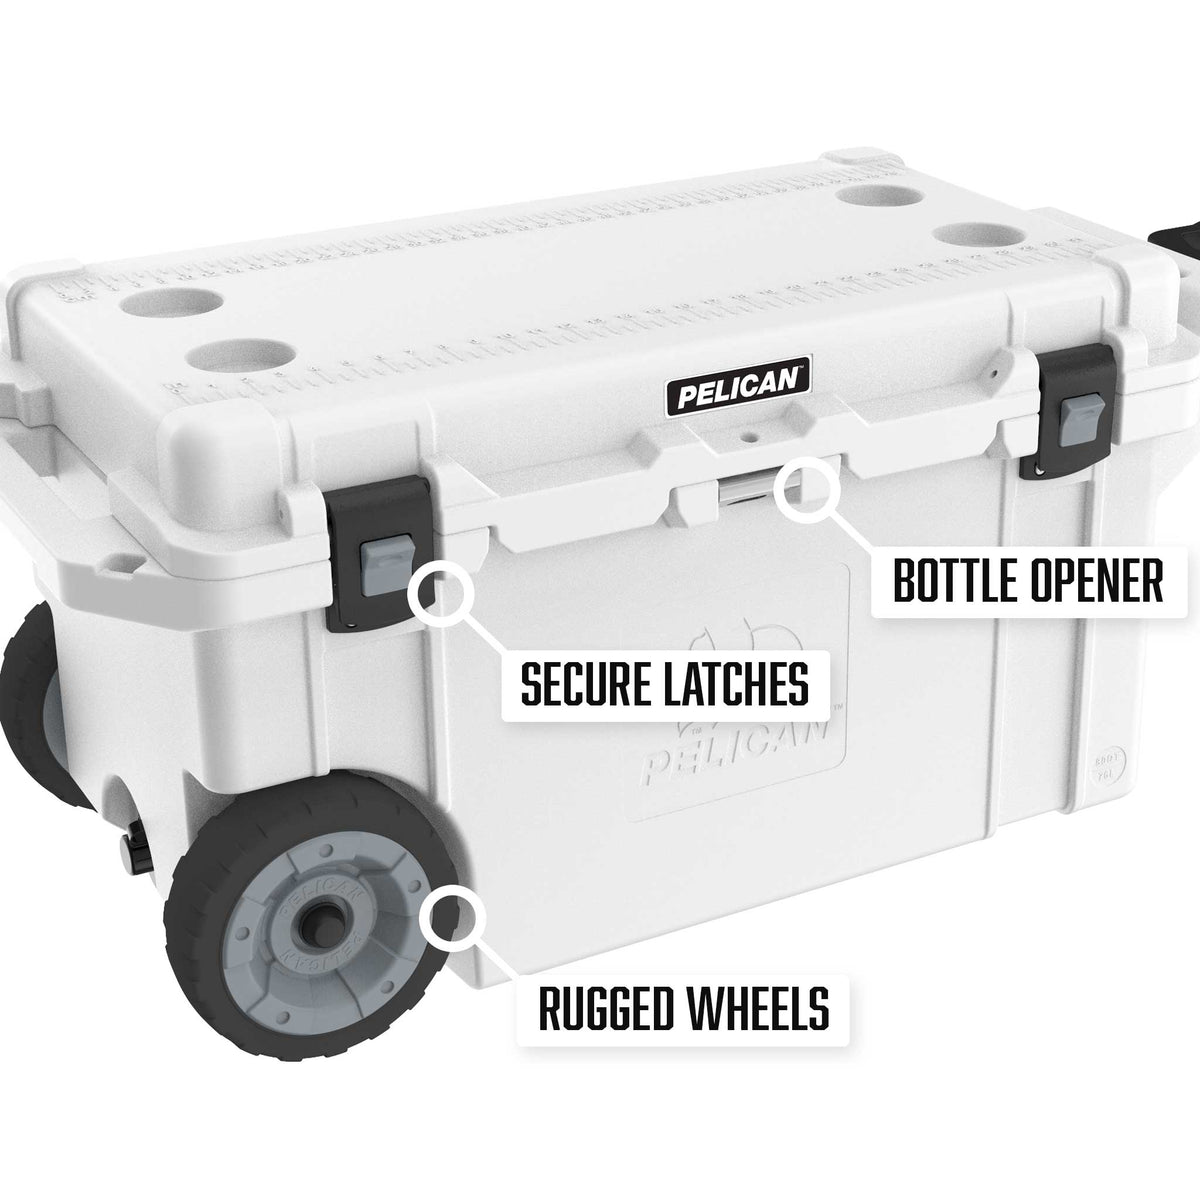 Pelican 80QT Elite Wheeled Cooler  has secure latches, rugged wheels, and a built in bottle opener